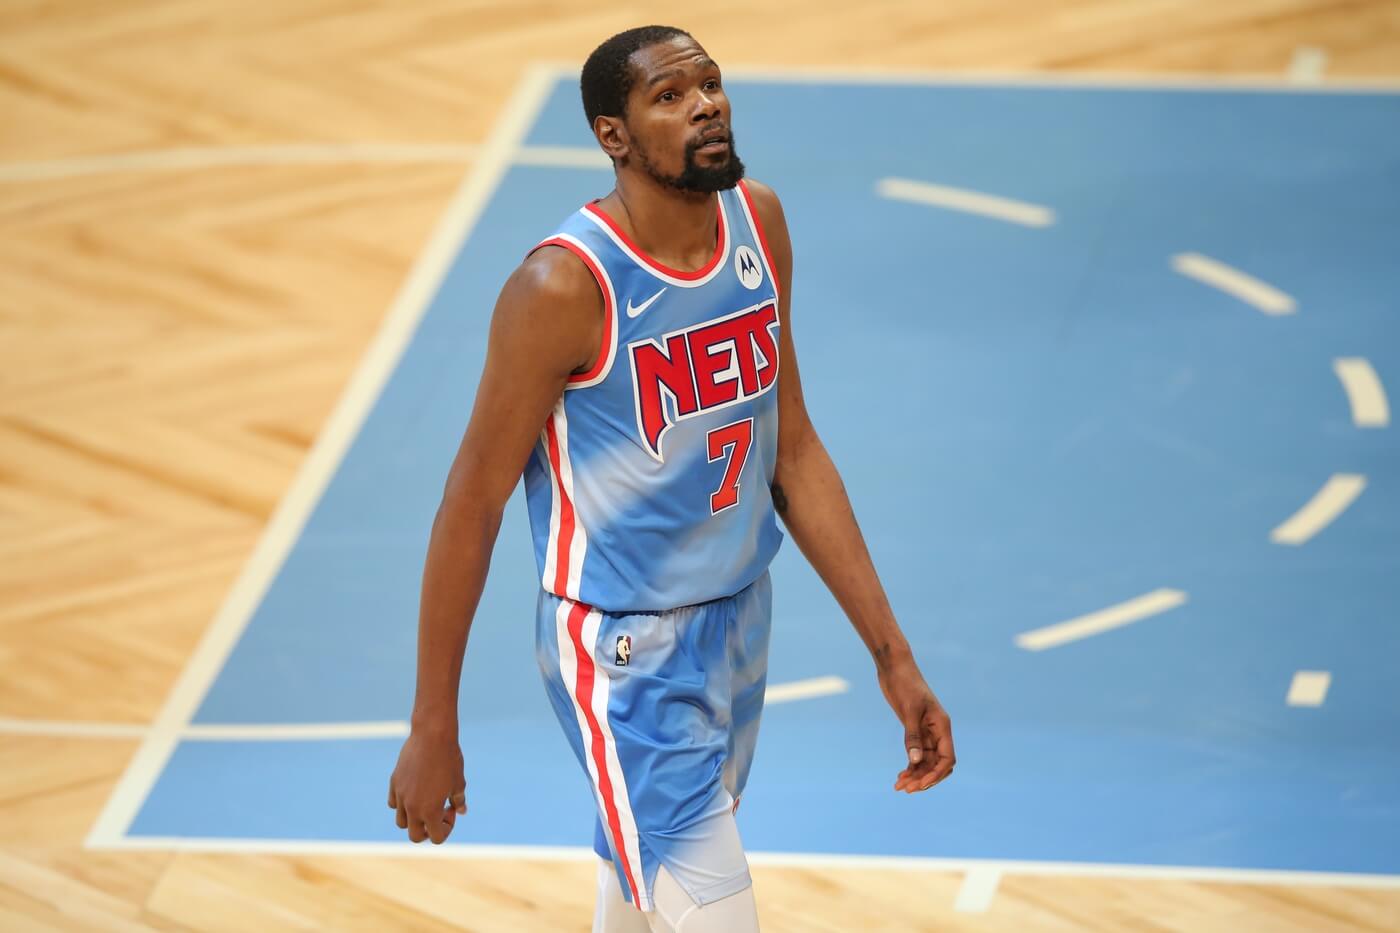 Jan 12, 2021; Brooklyn, New York, USA; Brooklyn Nets power forward Kevin Durant (7) reacts during the fourth quarter against the Denver Nuggets at Barclays Center. Mandatory Credit: Brad Penner-USA TODAY Sports